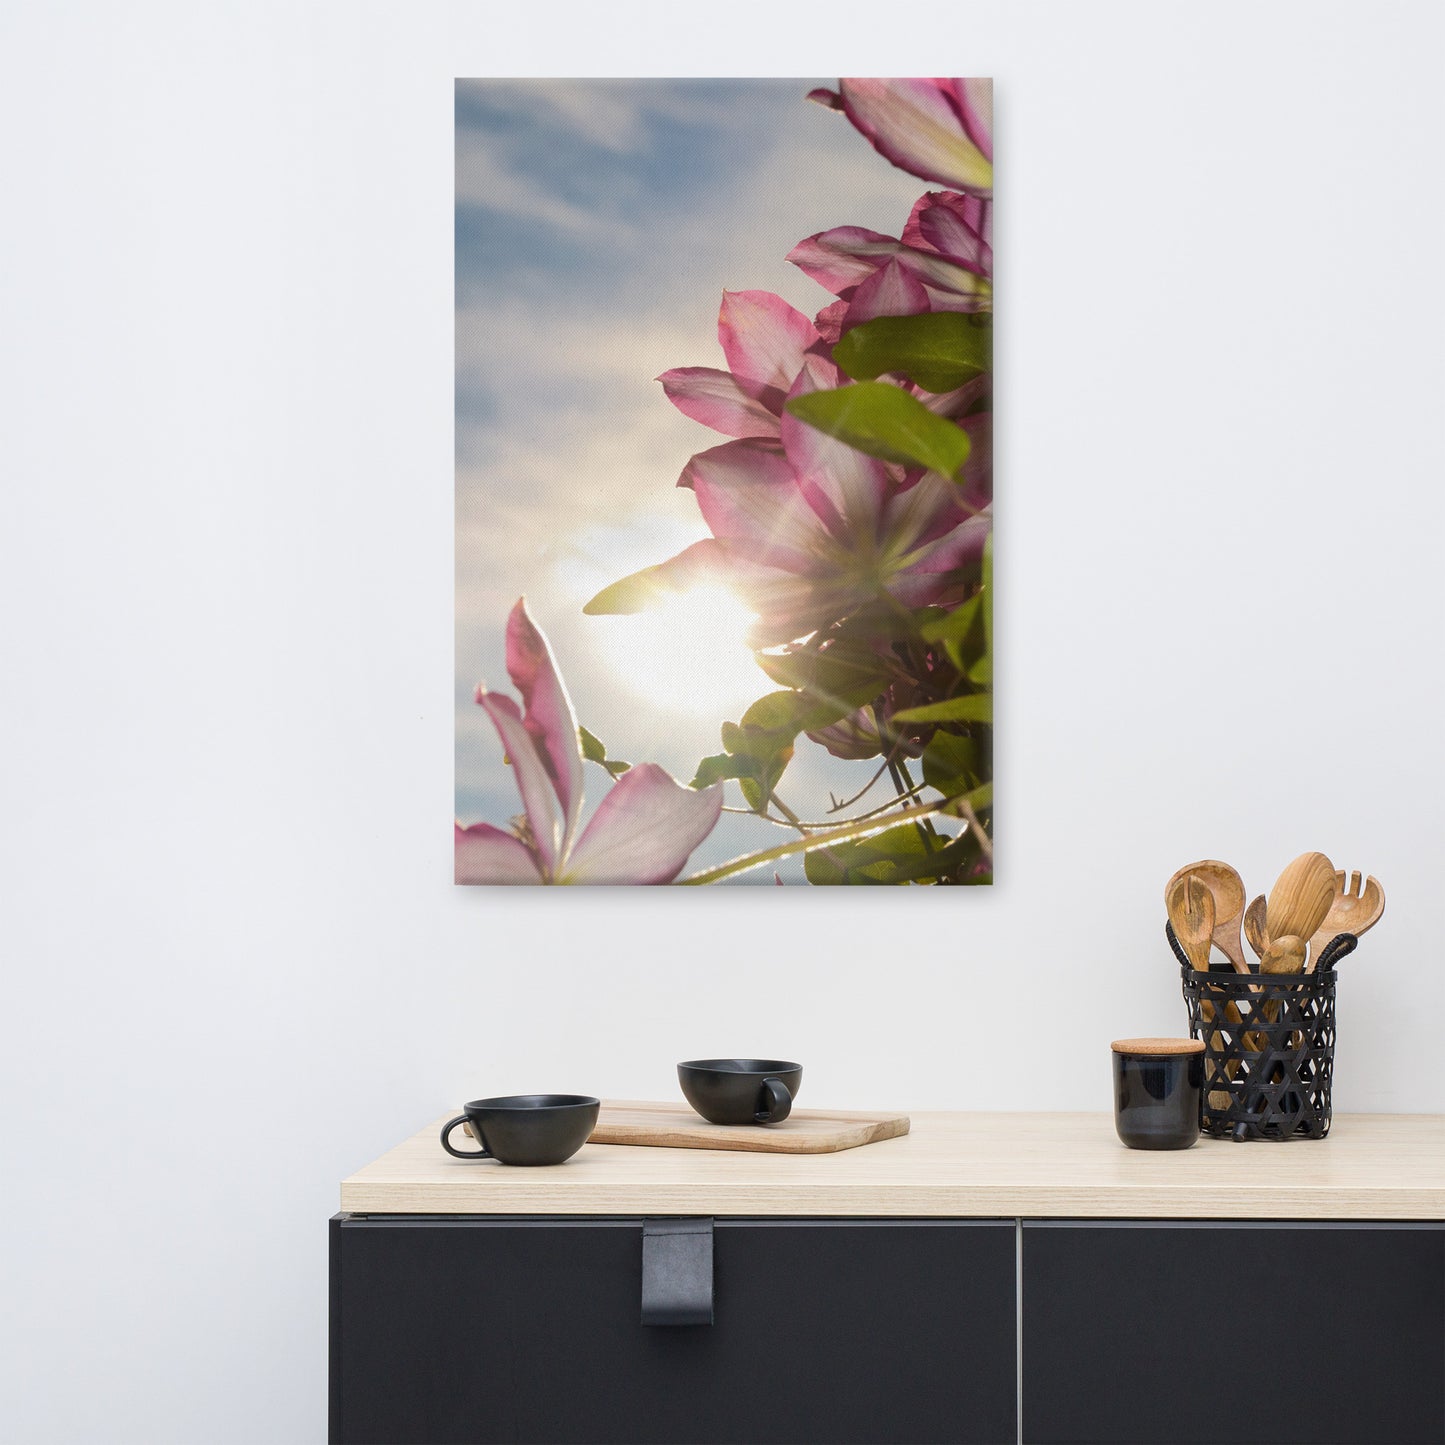 Towering Clematis Floral Nature Canvas Wall Art Prints